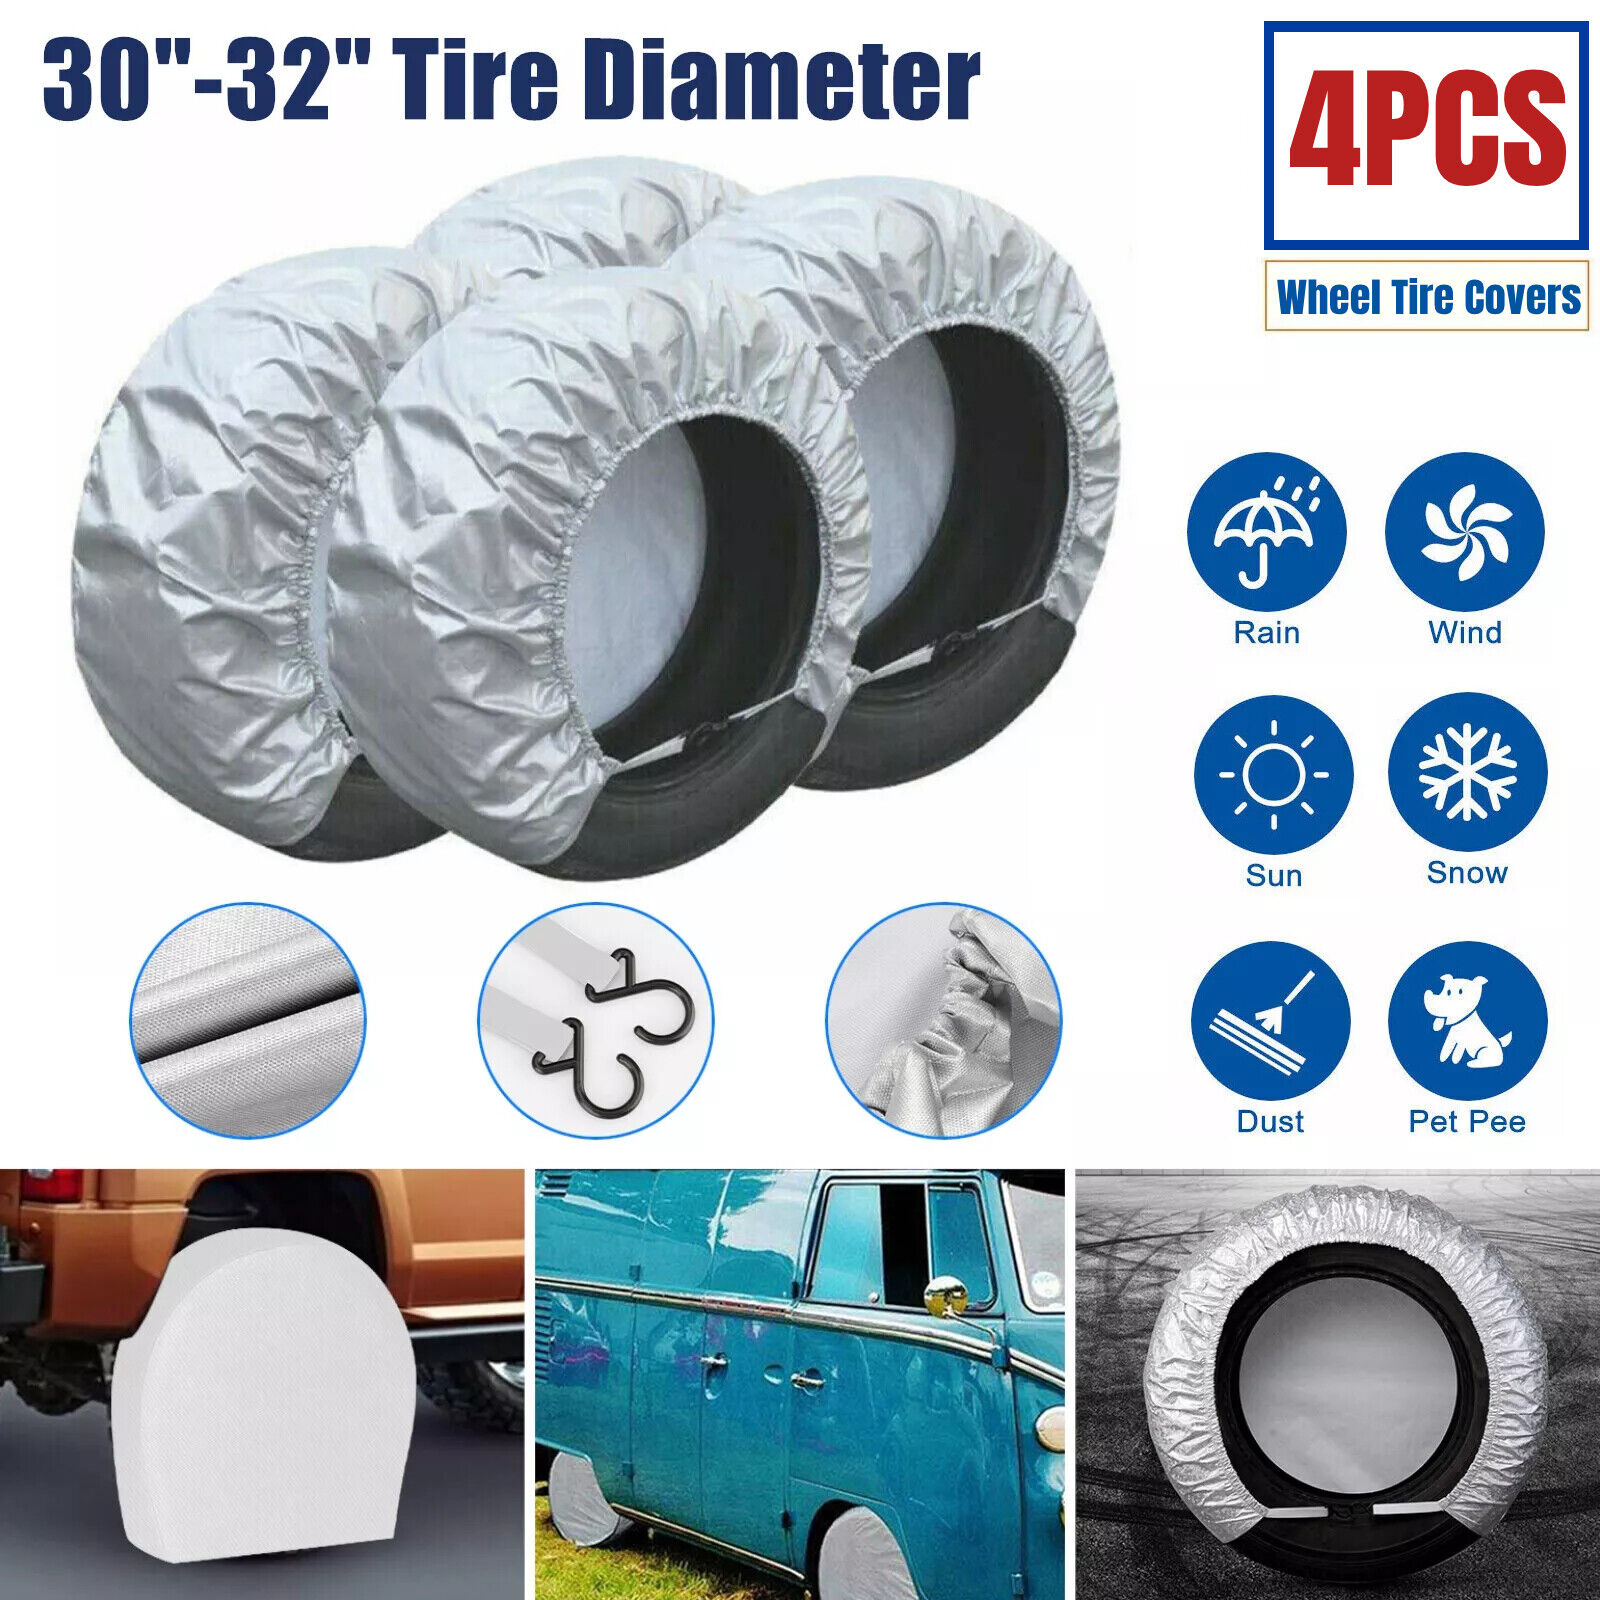 4Pcs Wheel Tire Covers 30-32'' Tire Protector Cover Set for Trailer Car Truck RV